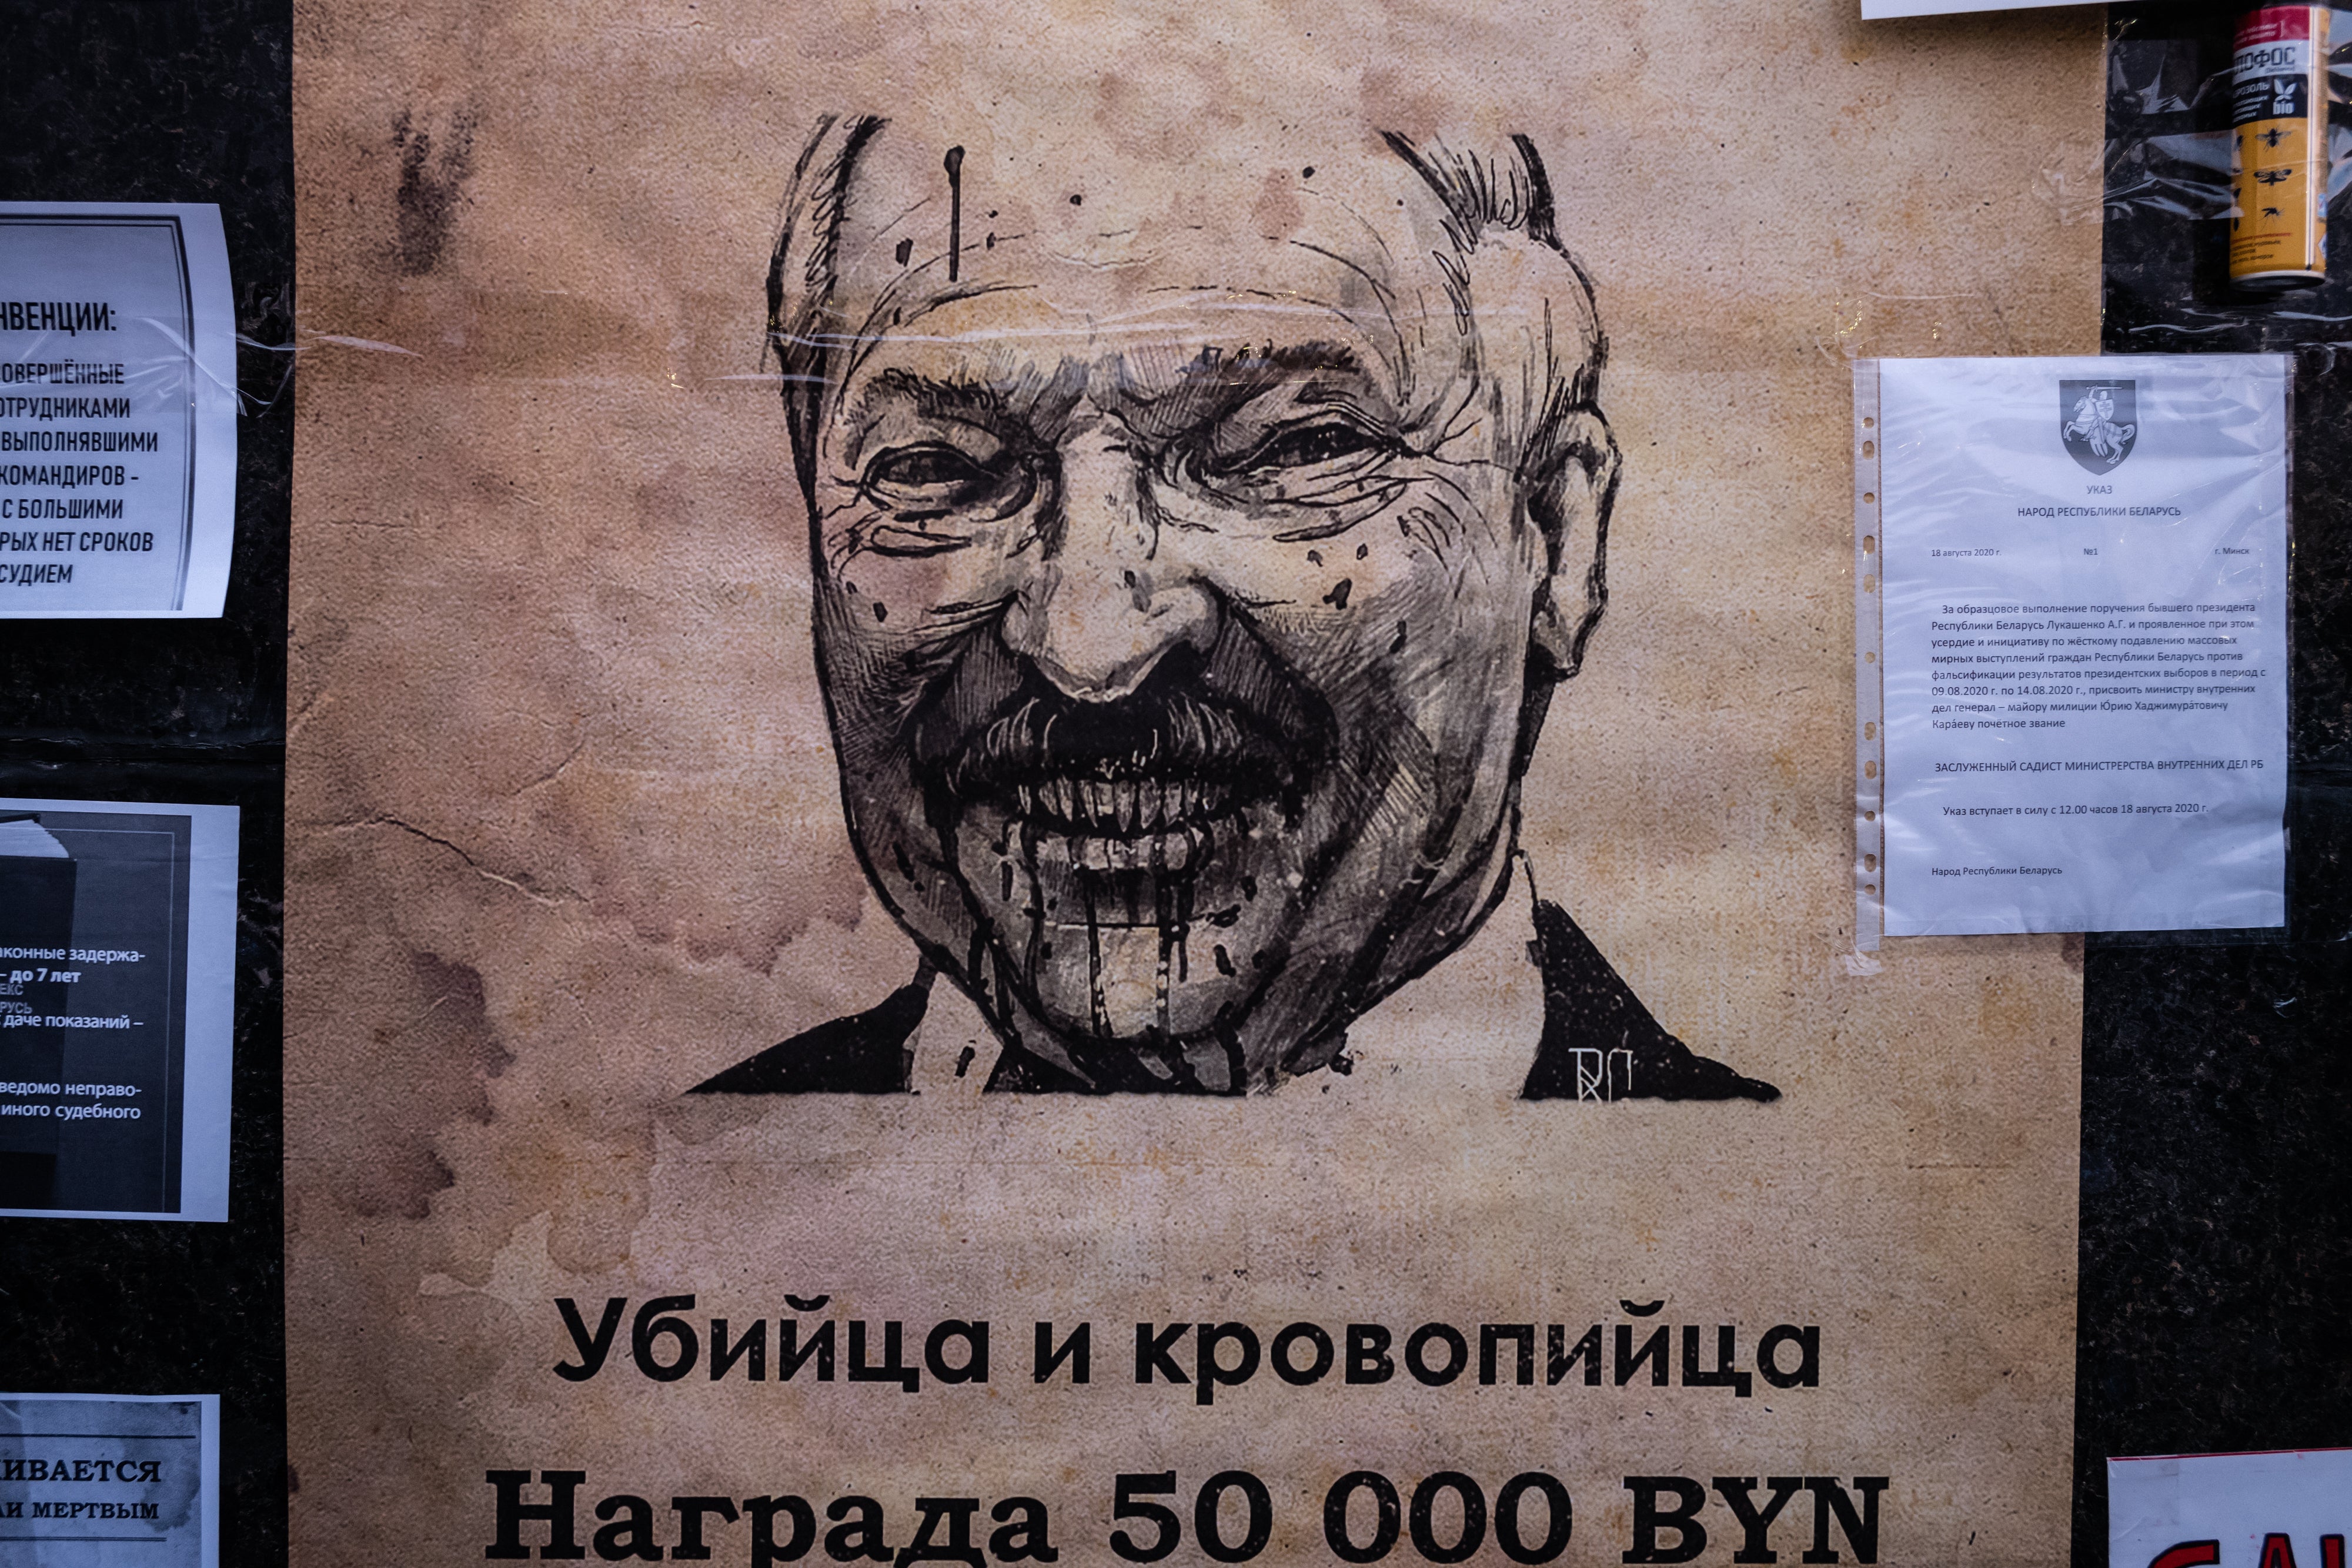 A wanted poster with an image of Lukashenko posted after the disputed presidential election last year